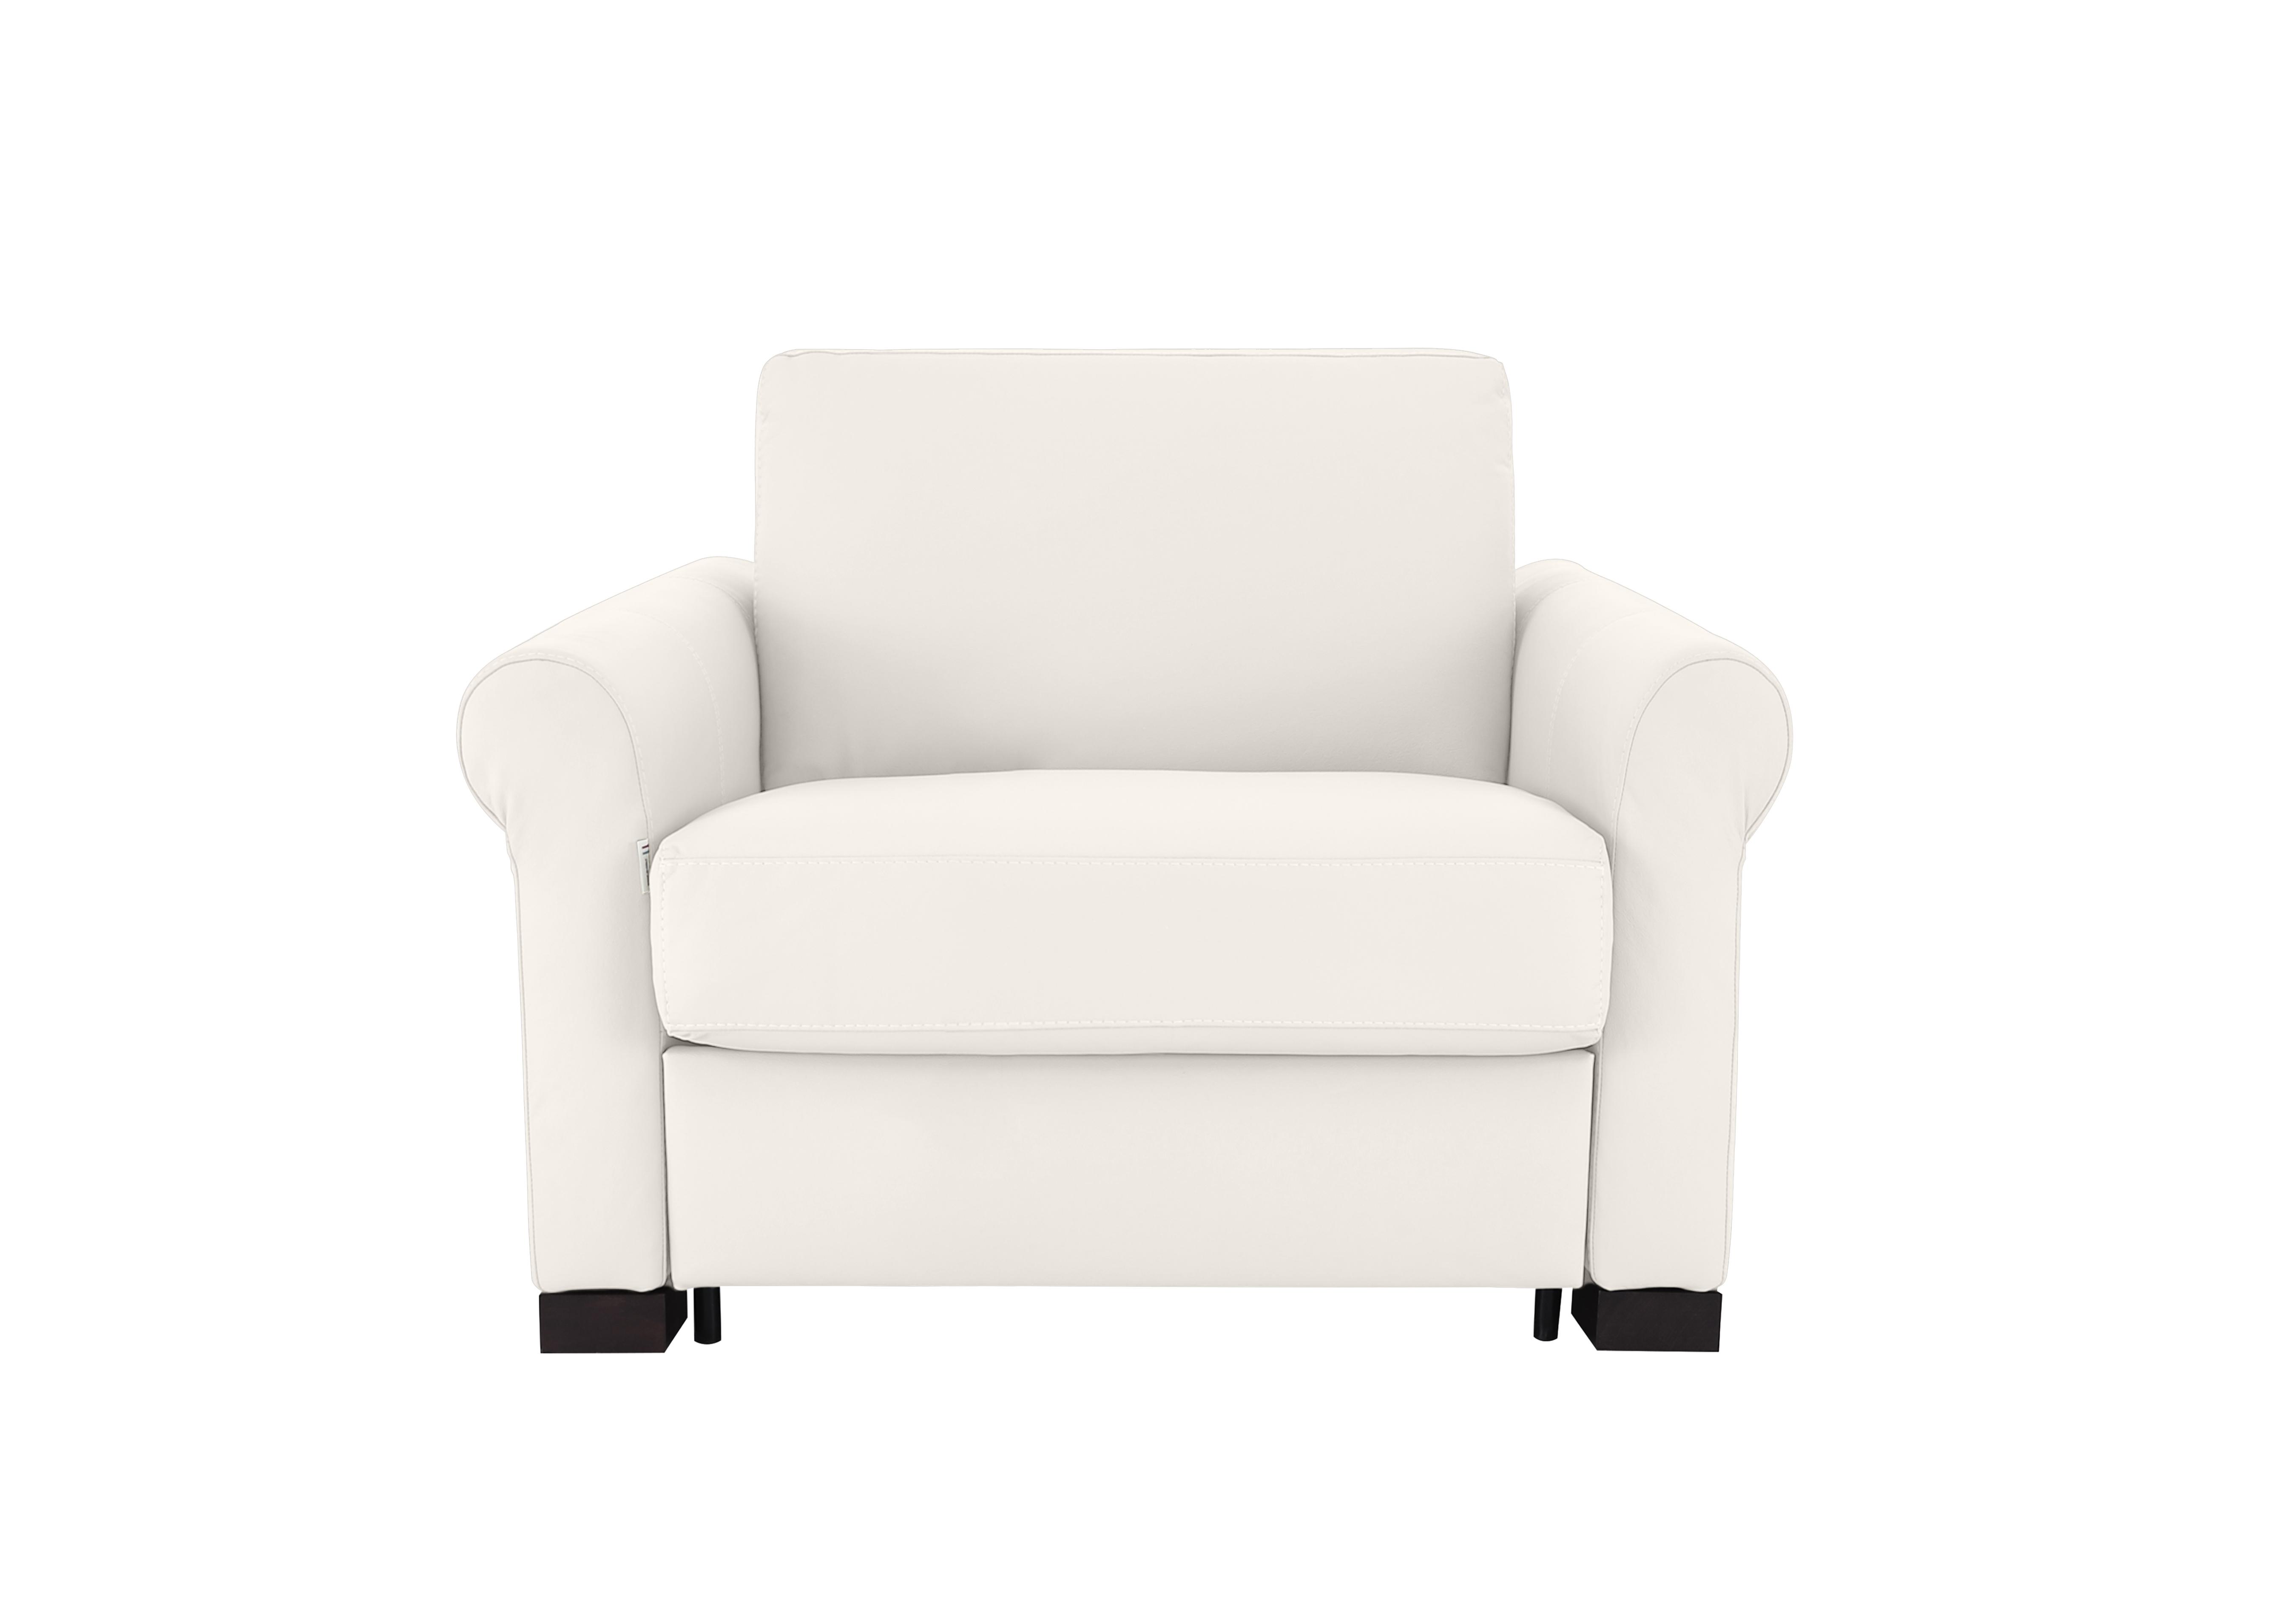 Alcova Leather Chair Sofa Bed with Scroll Arms in Torello Bianco 93 on Furniture Village